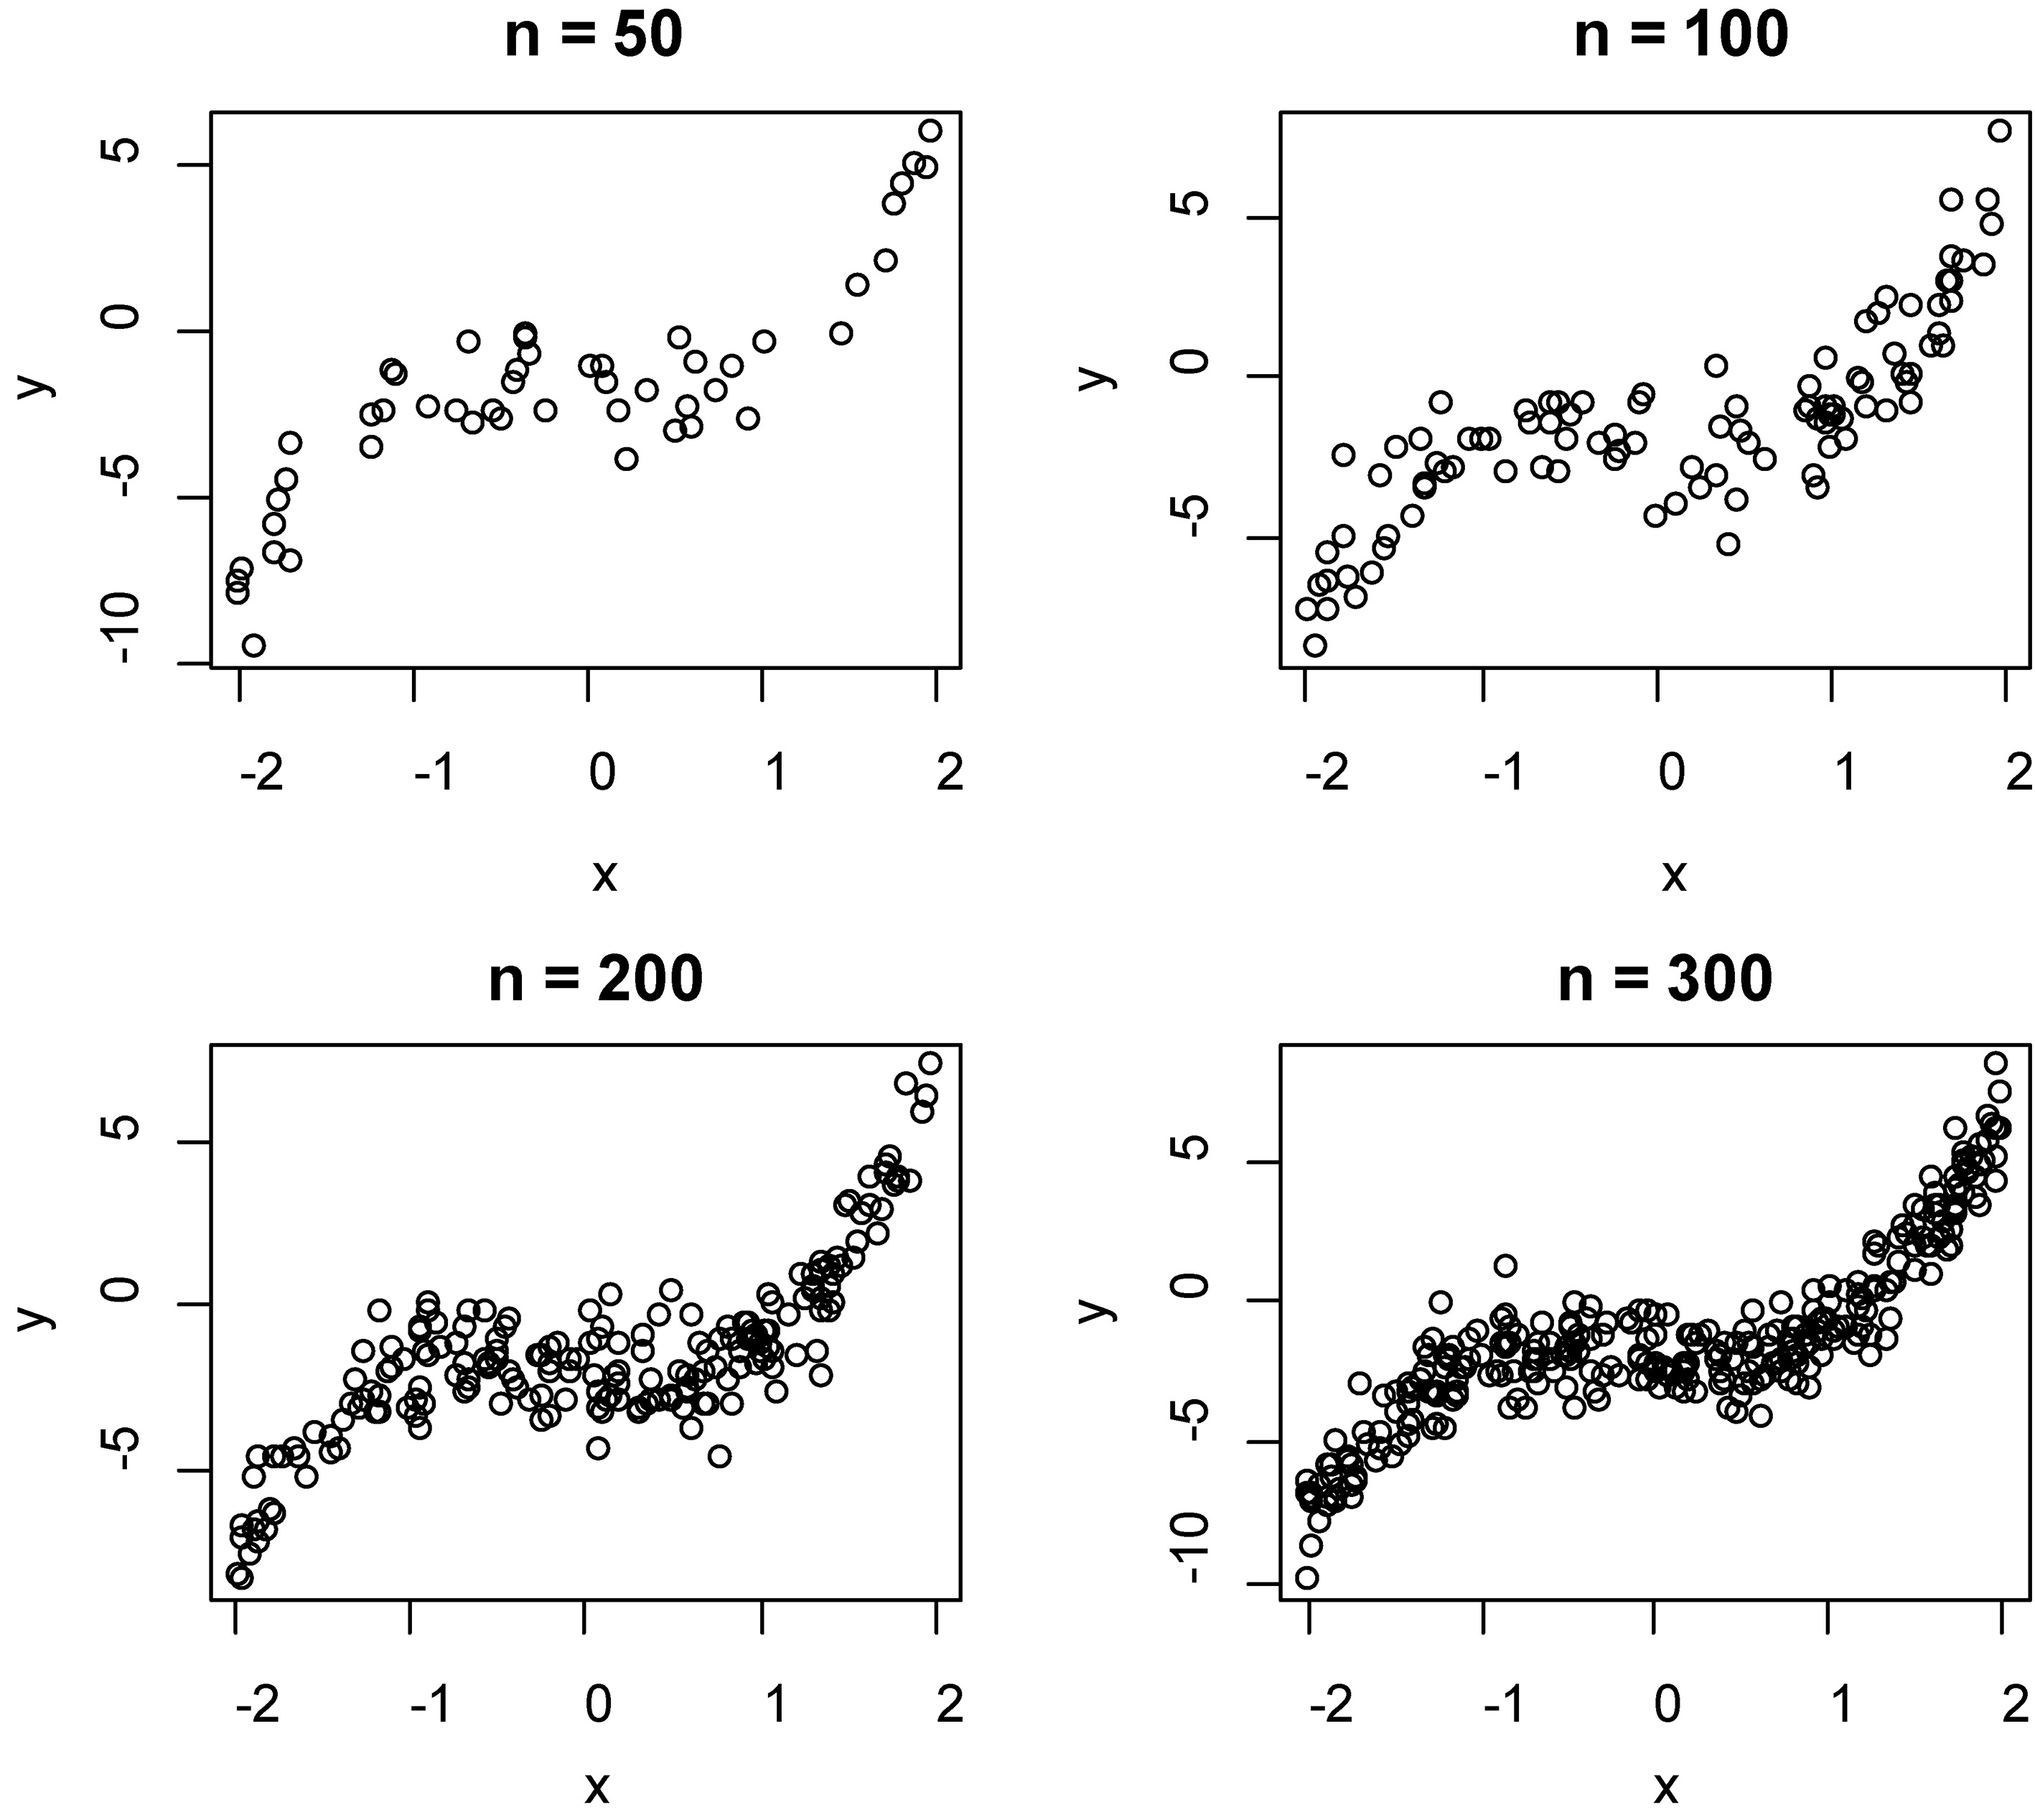 The scatter plot of dependent and independent variables on model 1.